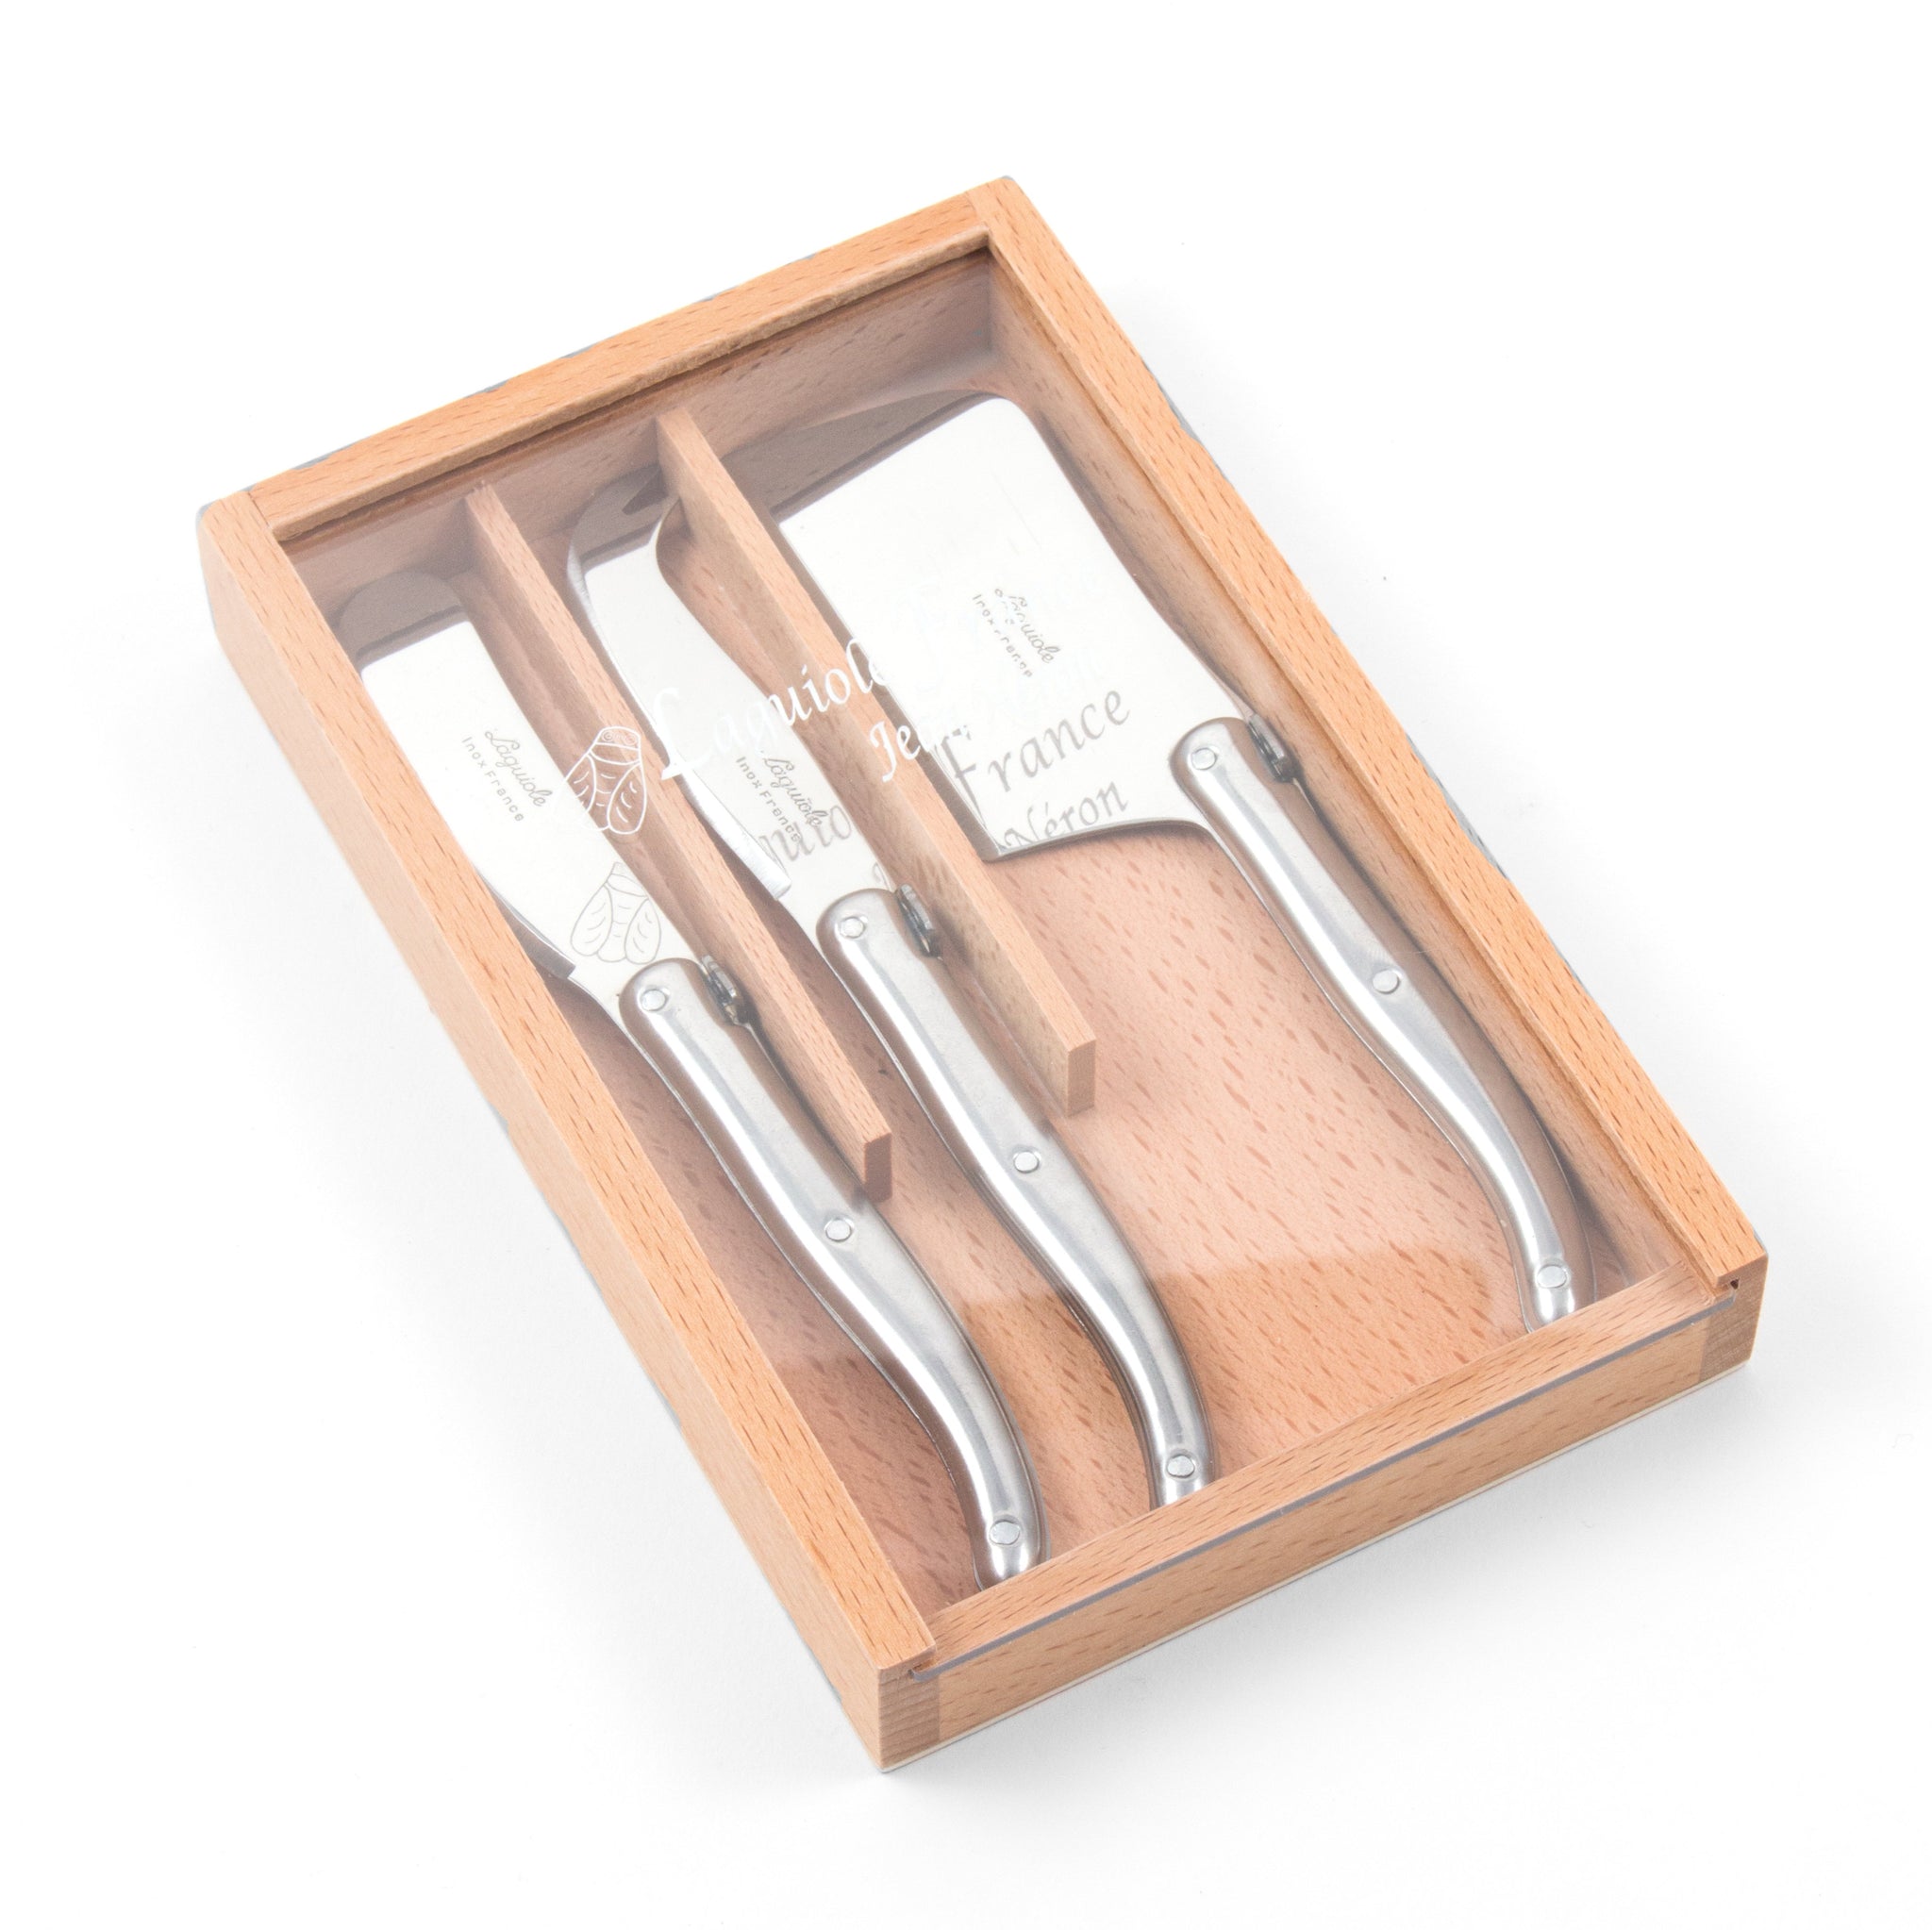 Laguiole 3 Piece Stainless Steel Mini Cheese Set in Wooden Box - French Dry Goods